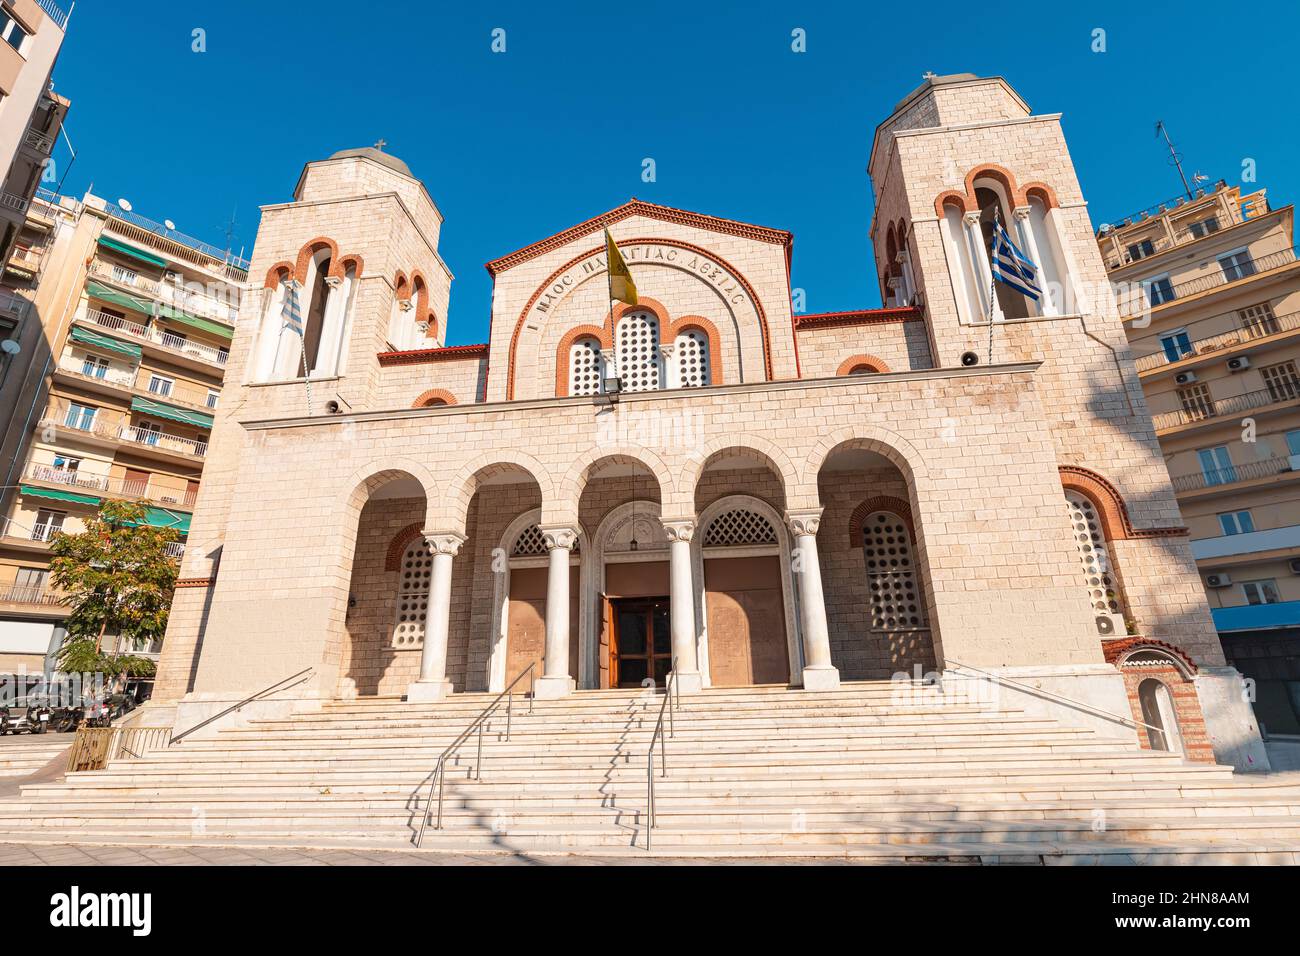 Holy Church of Panagia Dexia in Thessaloniki. Worship and religion in Macedonia concept Stock Photo